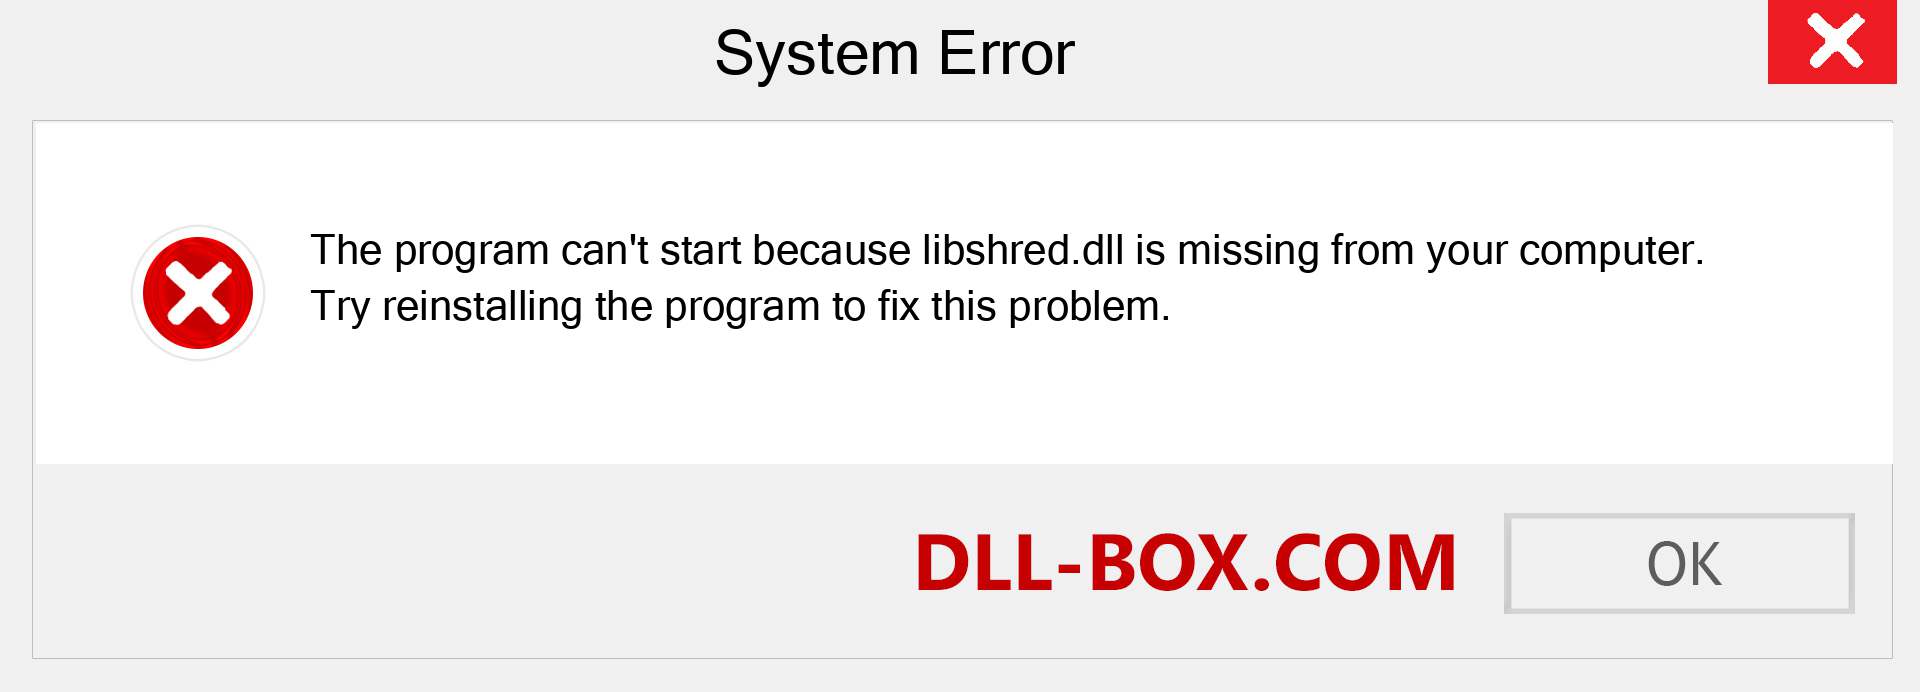  libshred.dll file is missing?. Download for Windows 7, 8, 10 - Fix  libshred dll Missing Error on Windows, photos, images